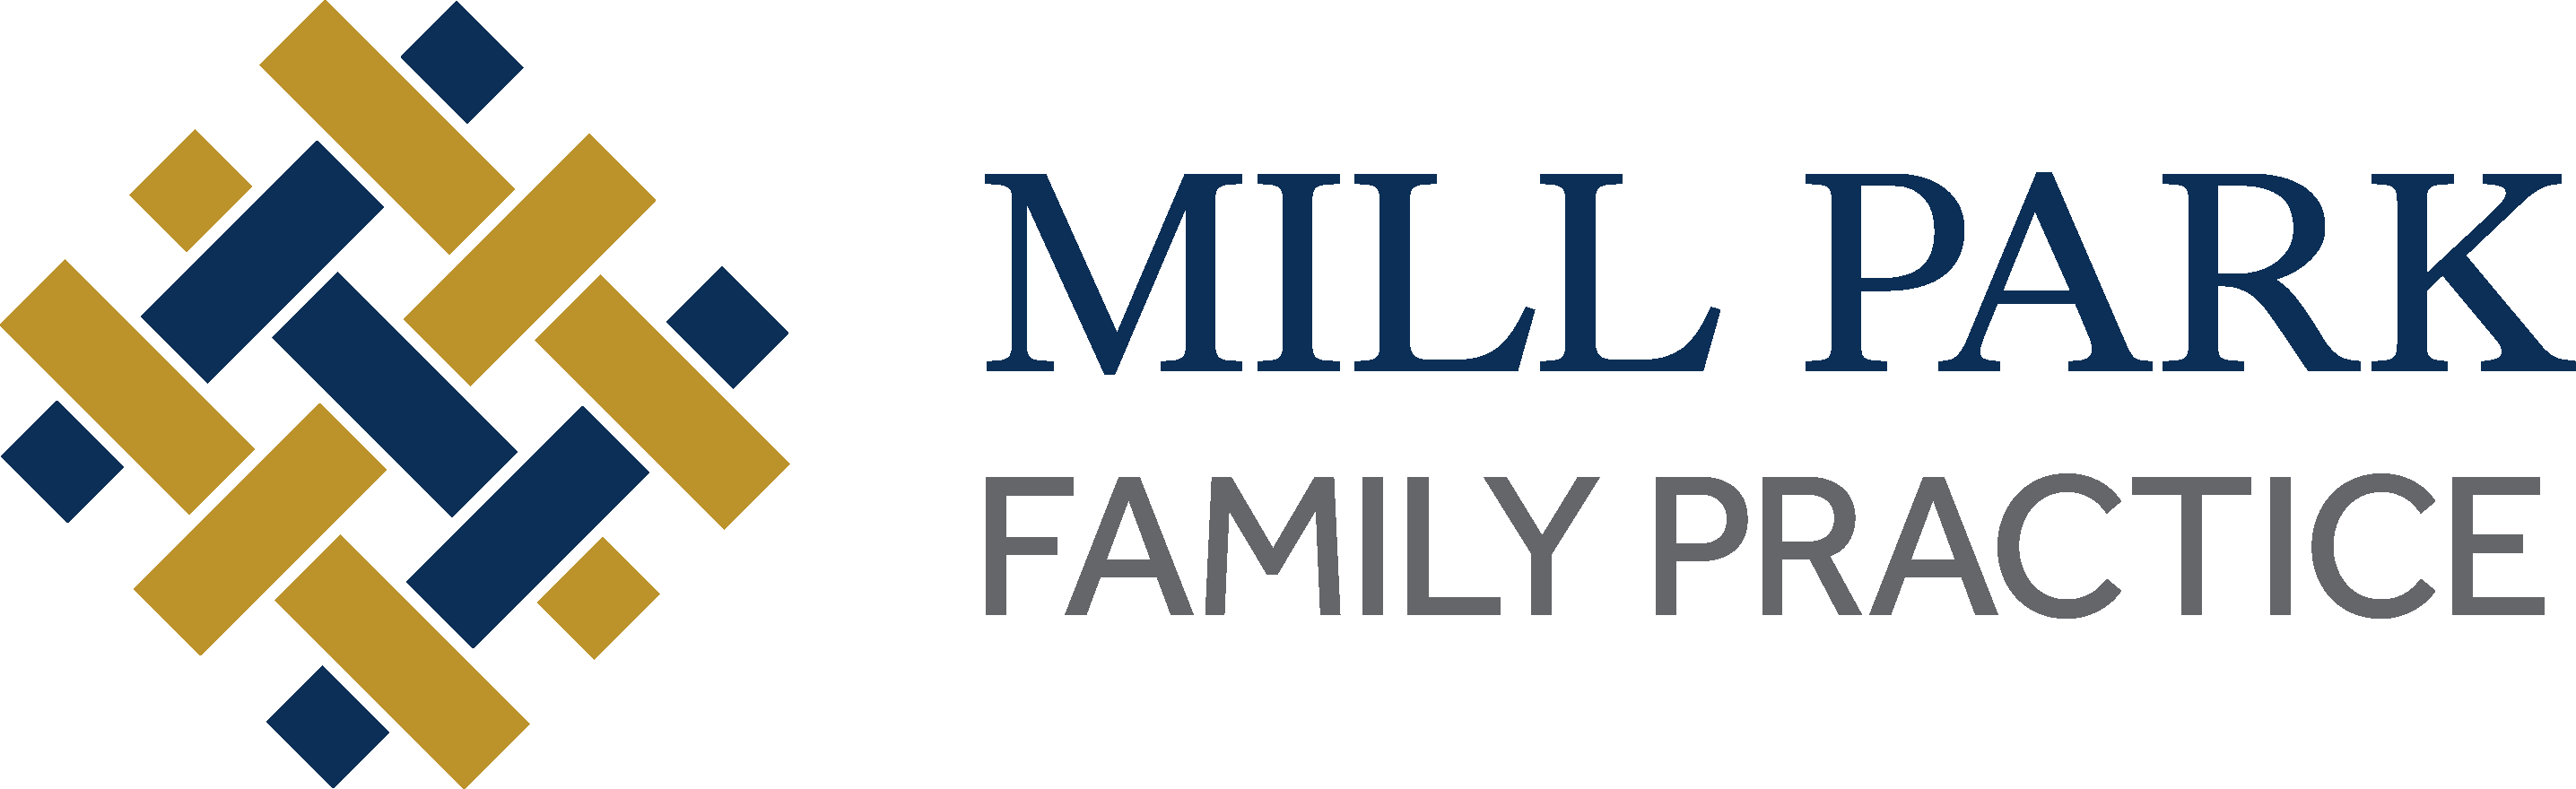 Mill Park Family Practice